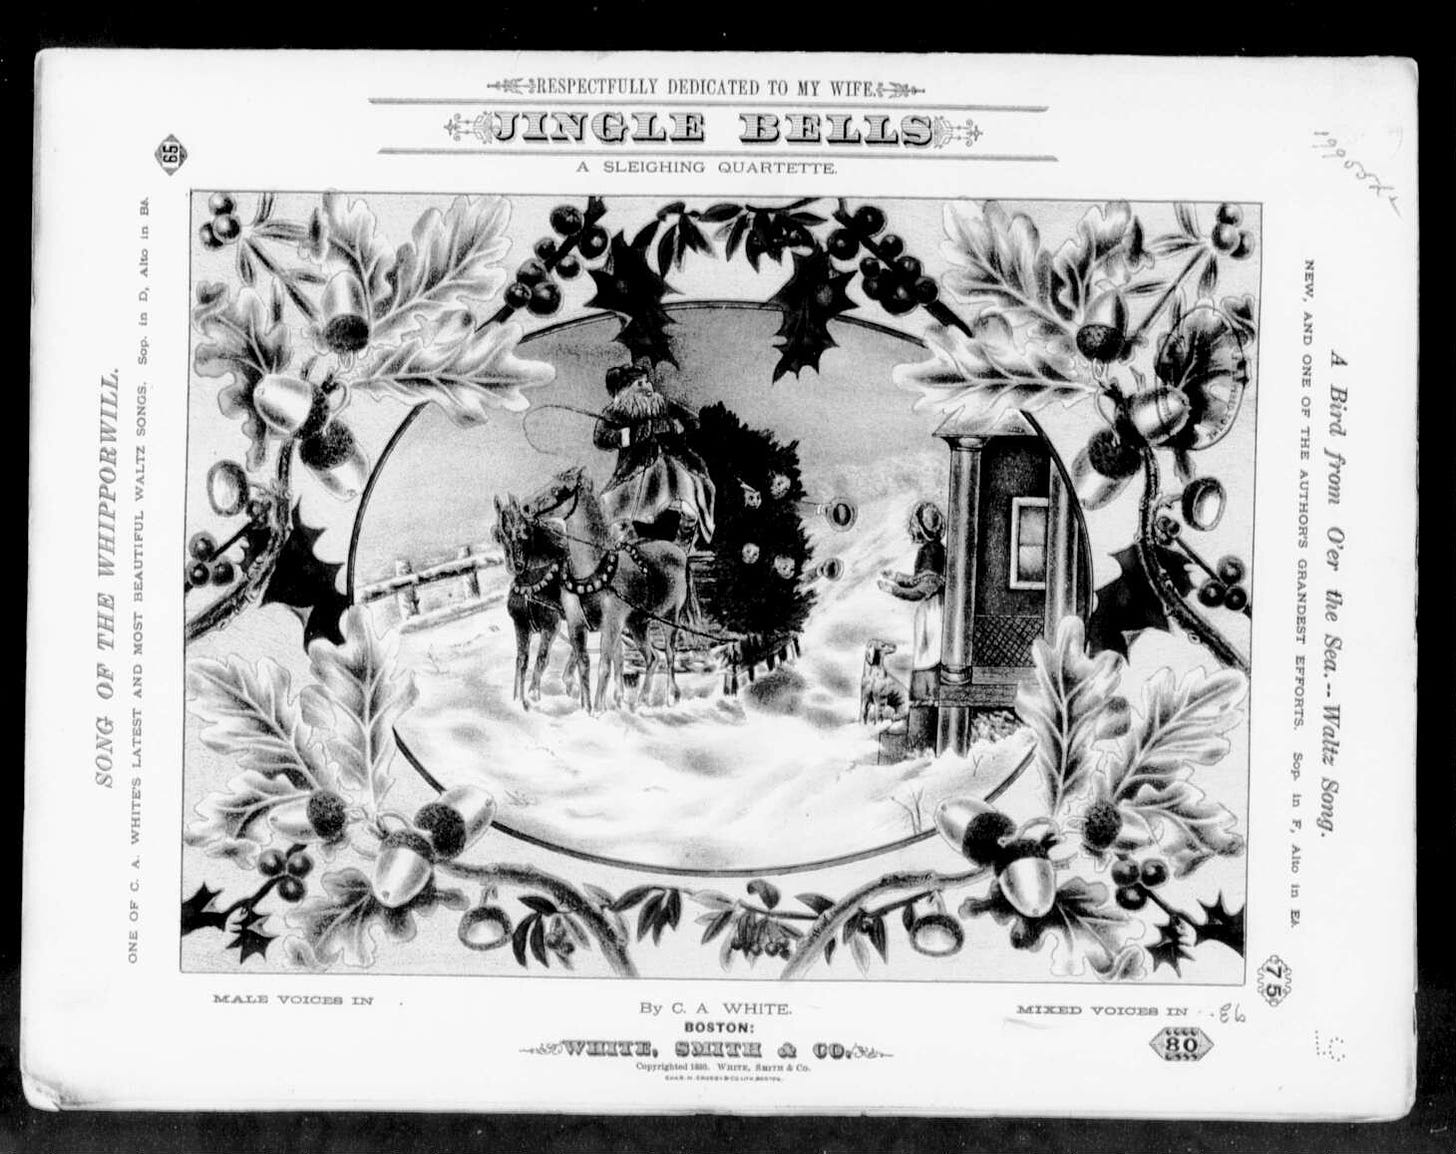 Black-andBlack-and-white cover sheet for sheet music for Jingle Bells. In the middle is a horse-drawn wagon covered by what looks like a Christmas tree. The circle is surrounded by foliage and bells.